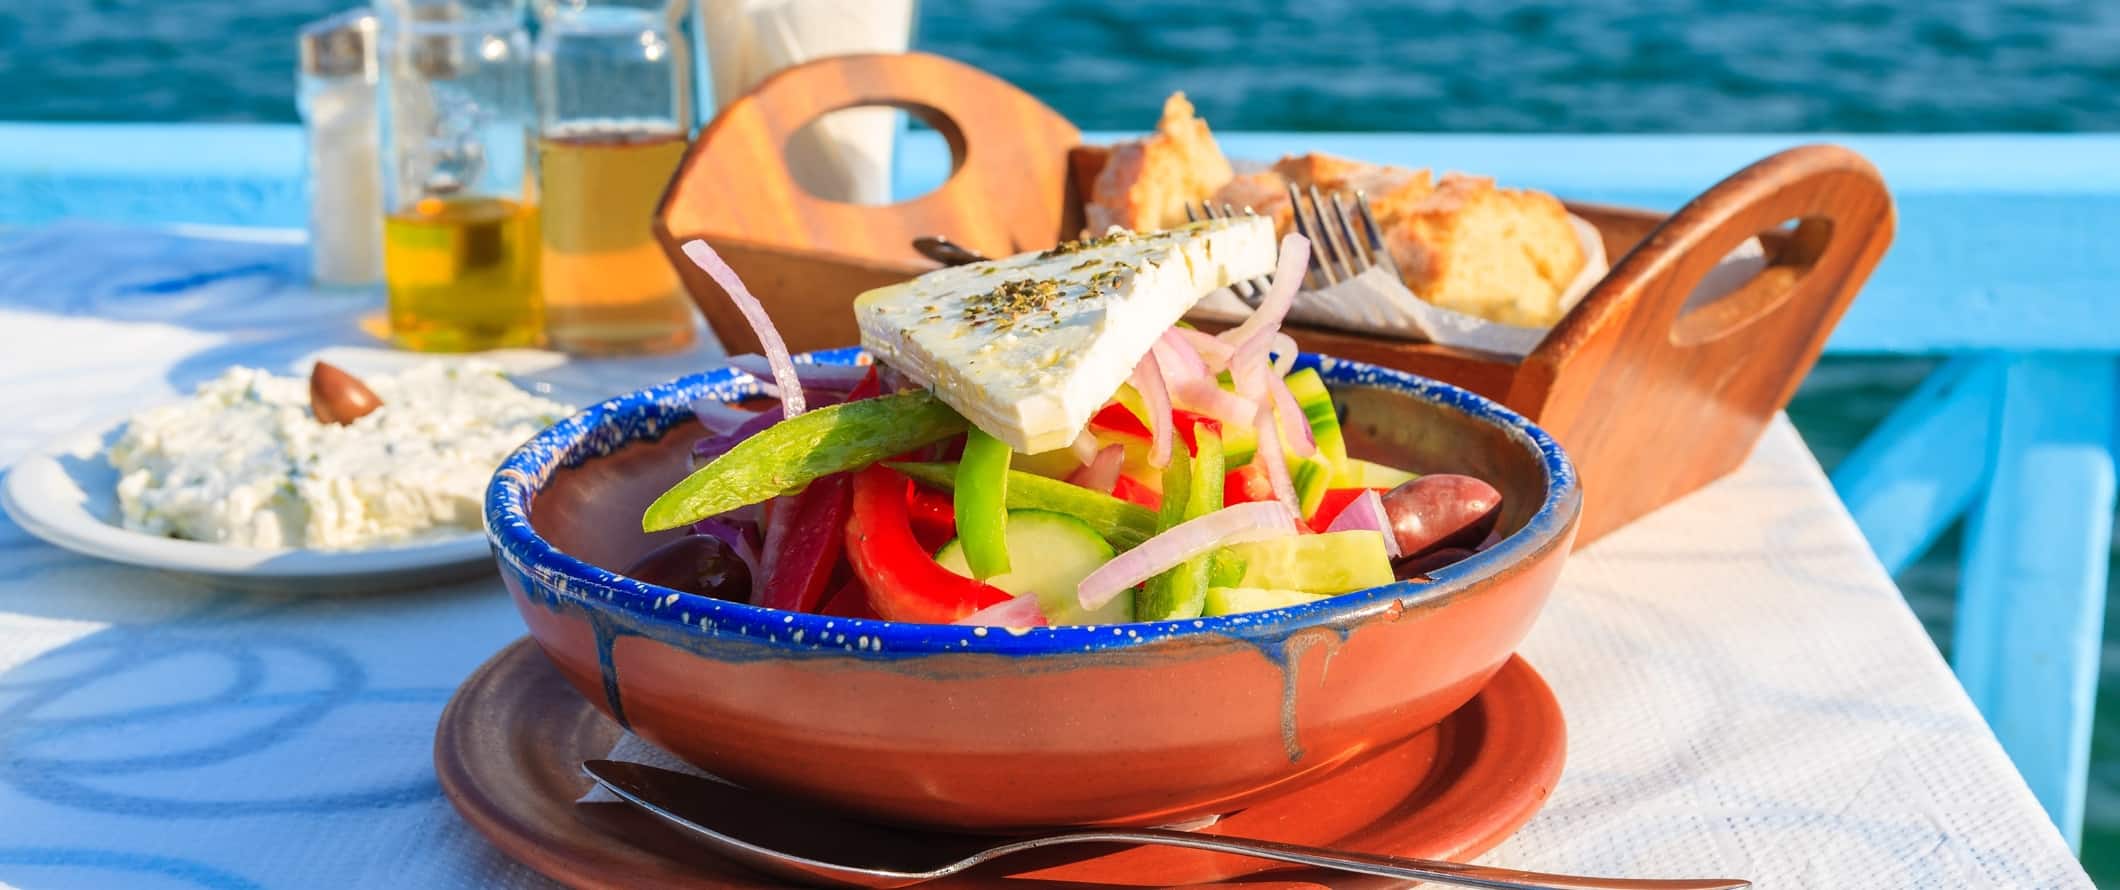 Greek salad, olive oil, bread, and dip at a table by the ocean in Greece